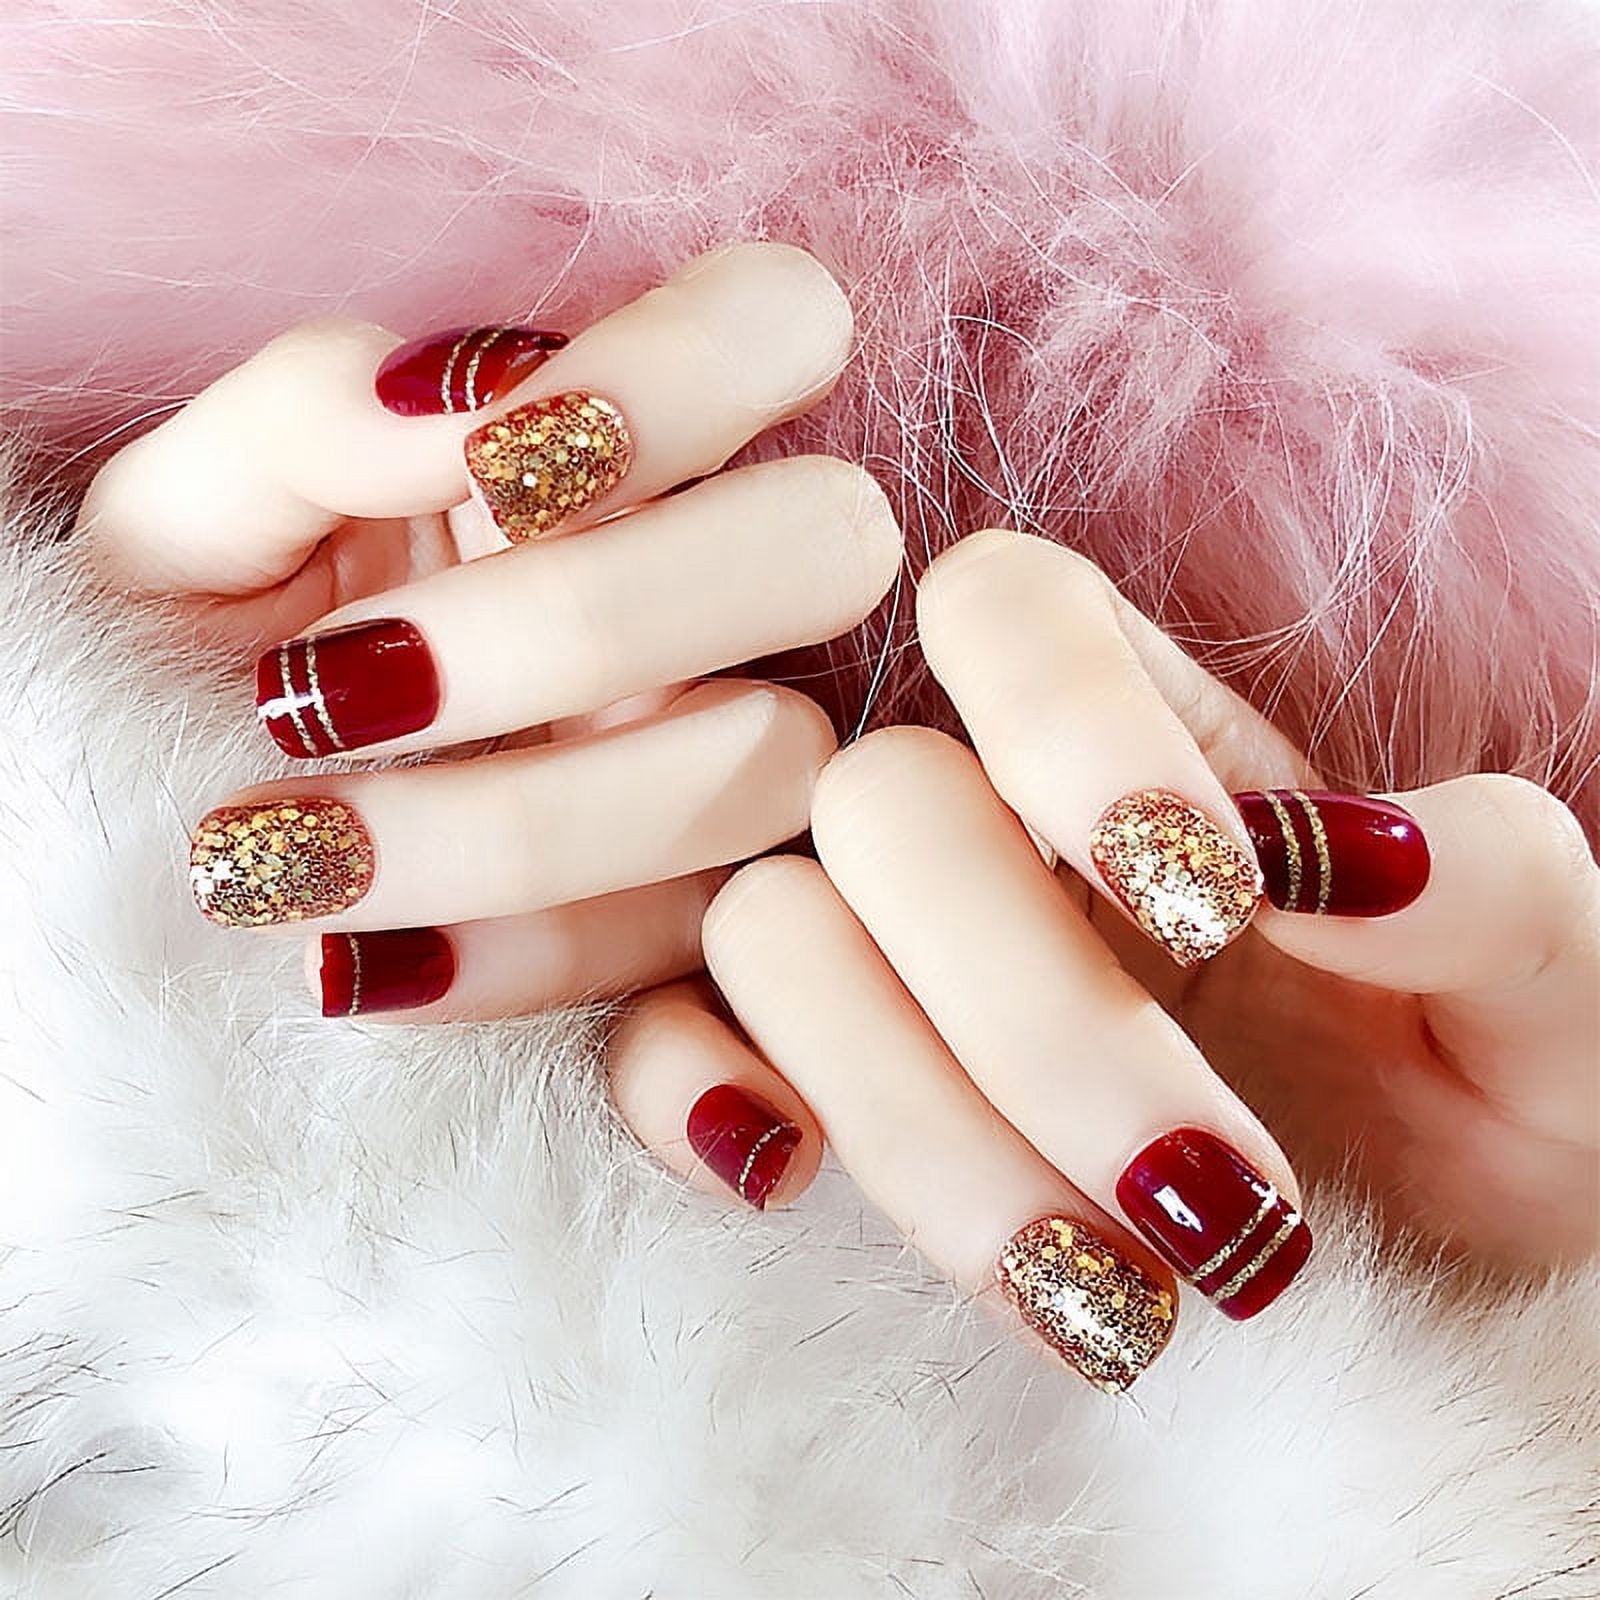 10 Of The Best Red Nail Polishes For Fall | Essence